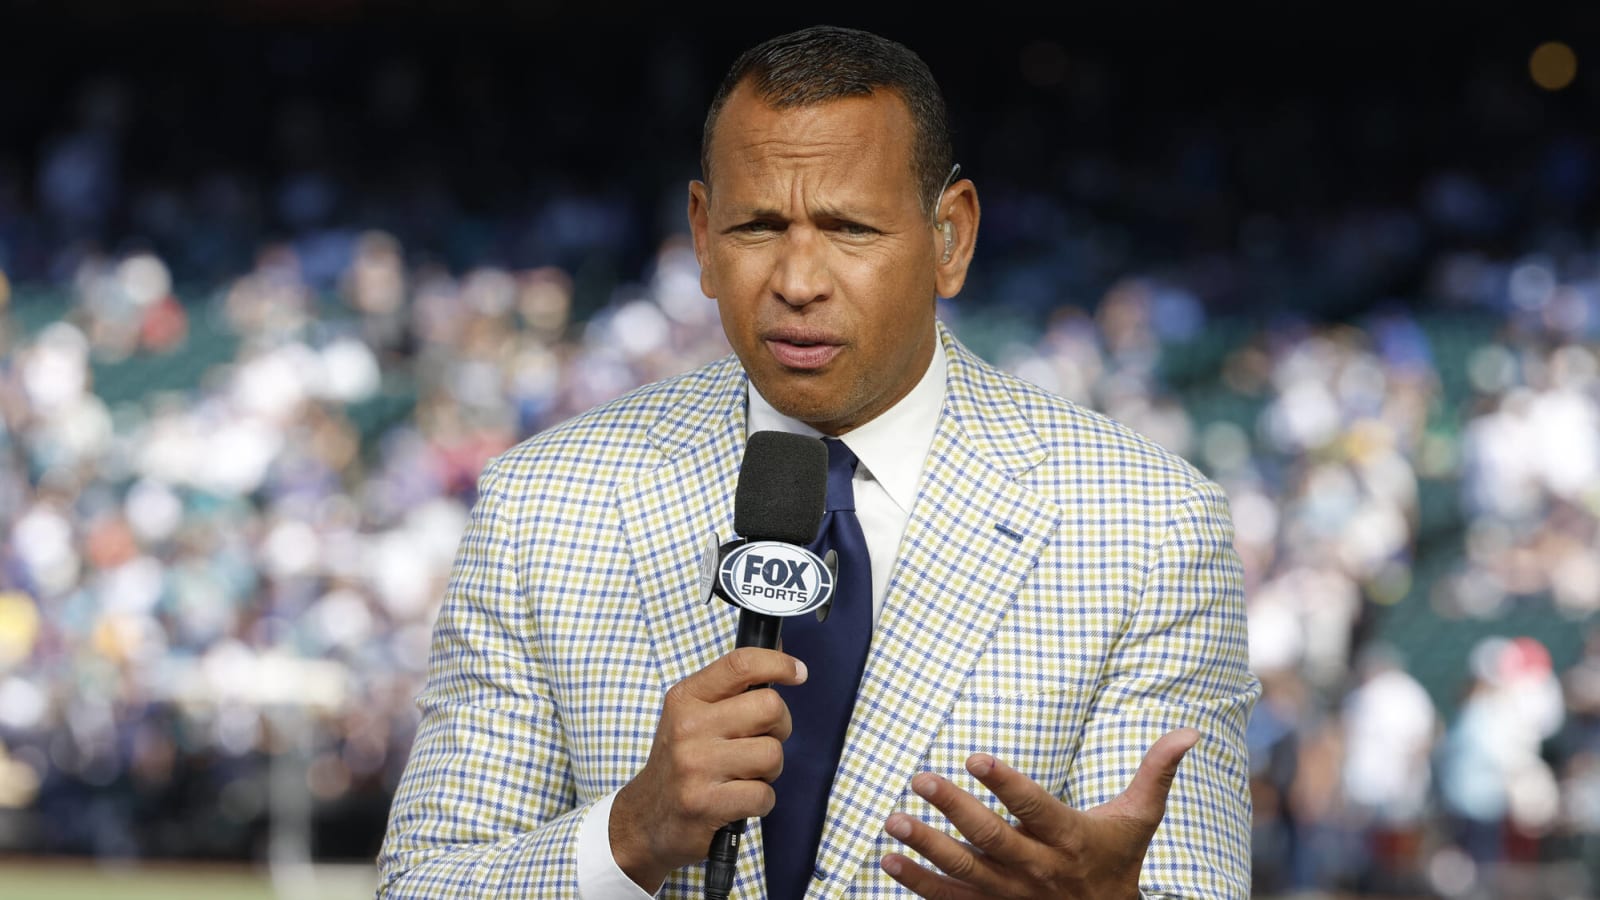 Alex Rodriguez ratted out three other players during Biogenesis probe